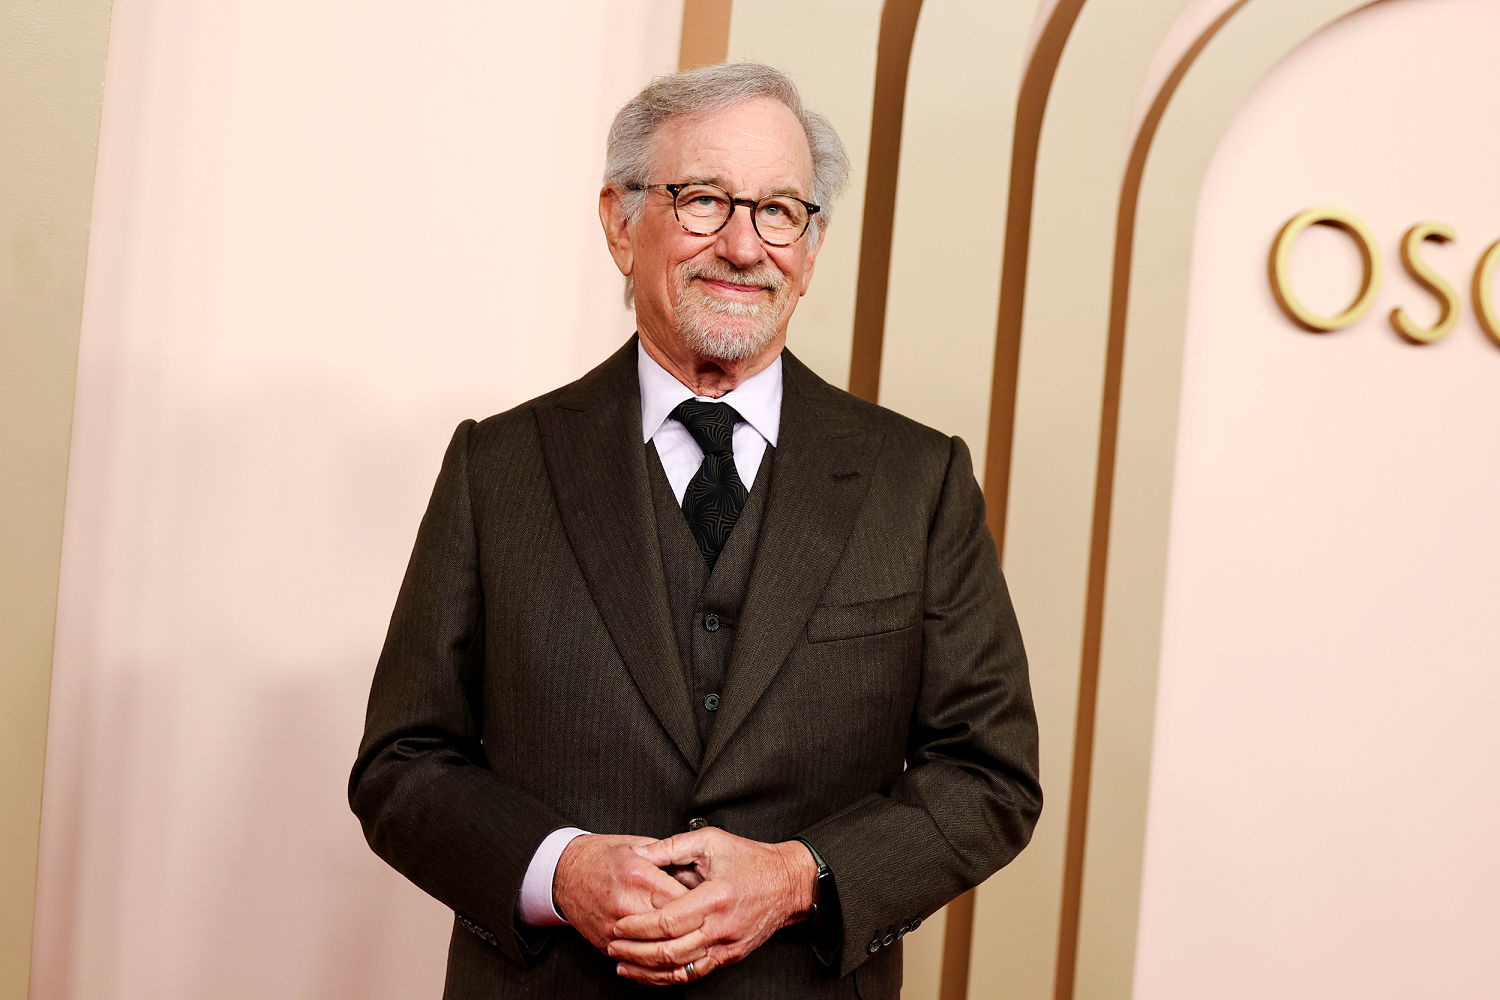 Steven Spielberg is providing strategy for the Biden campaign